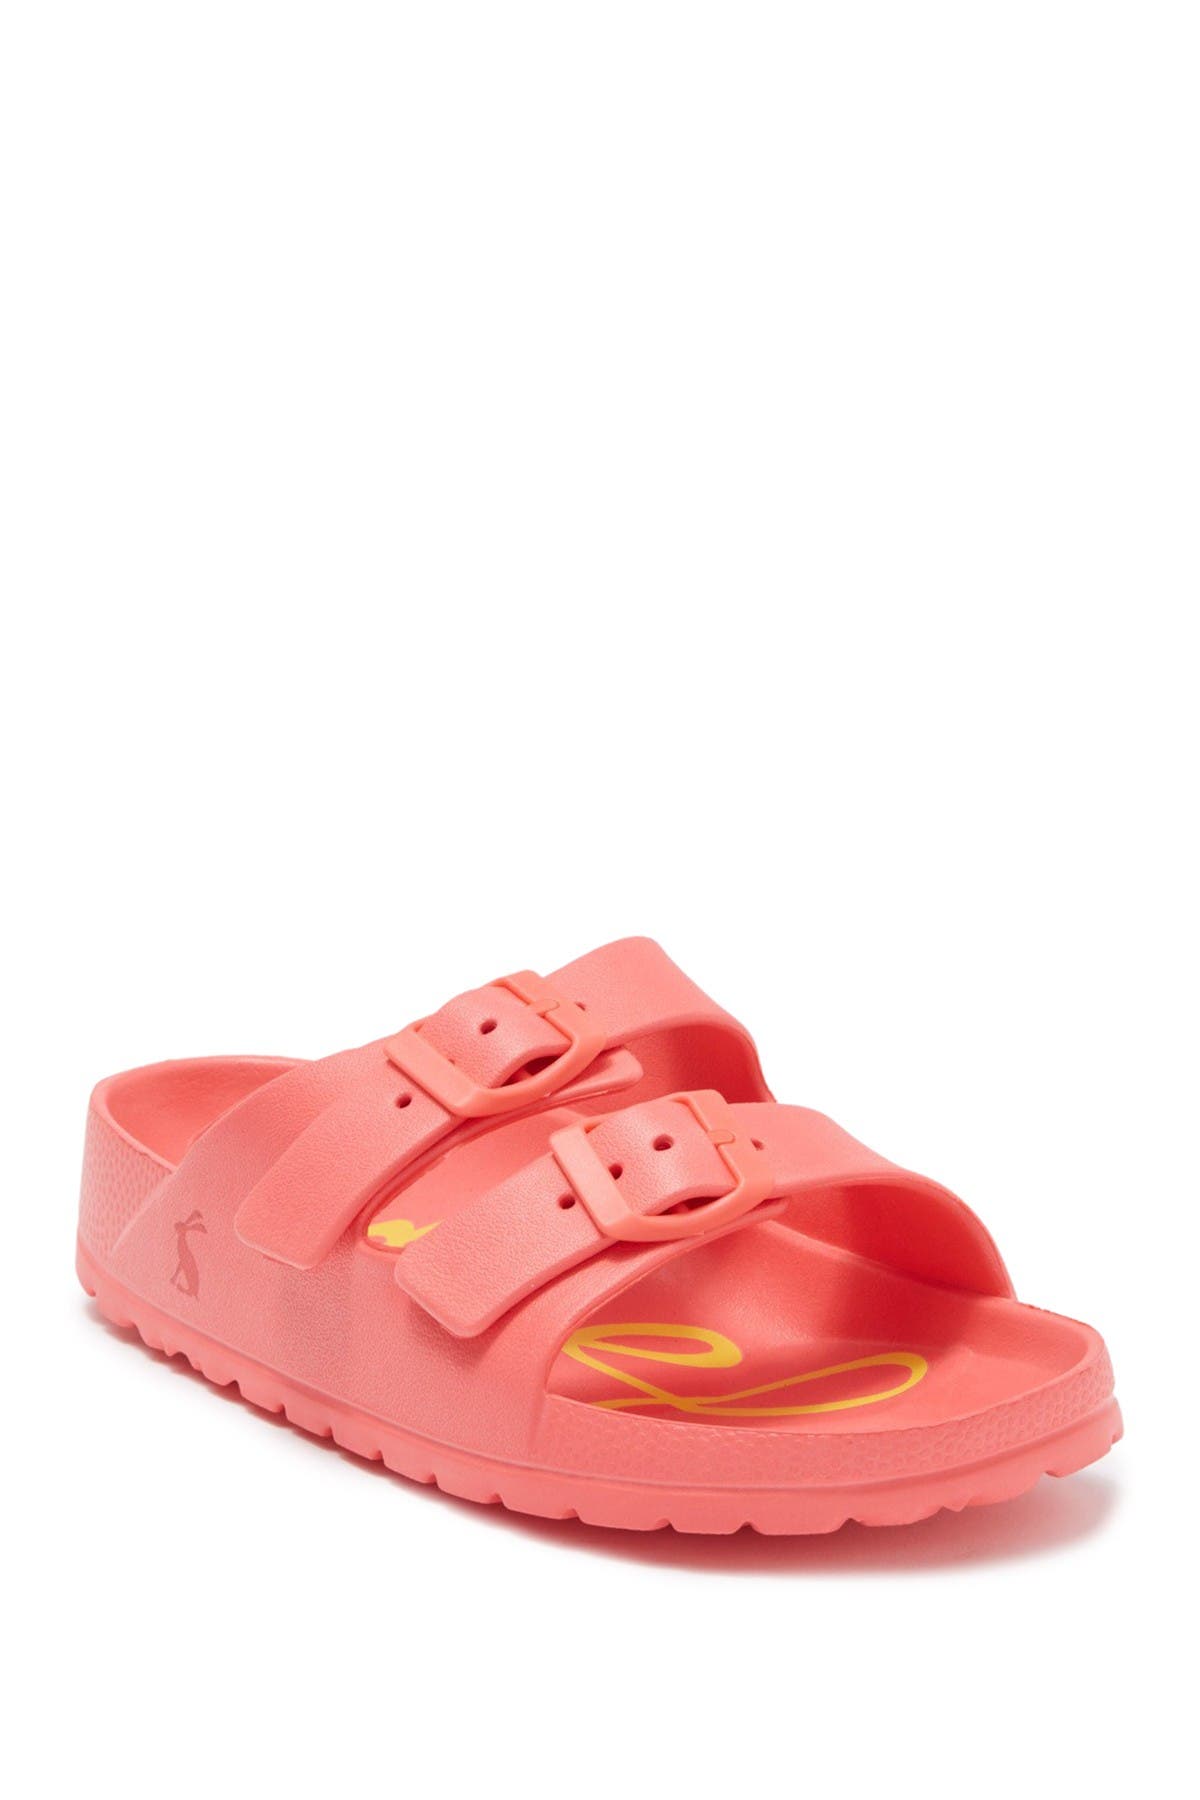 Joules Shore Buckle Slide Sandal In Brghtred